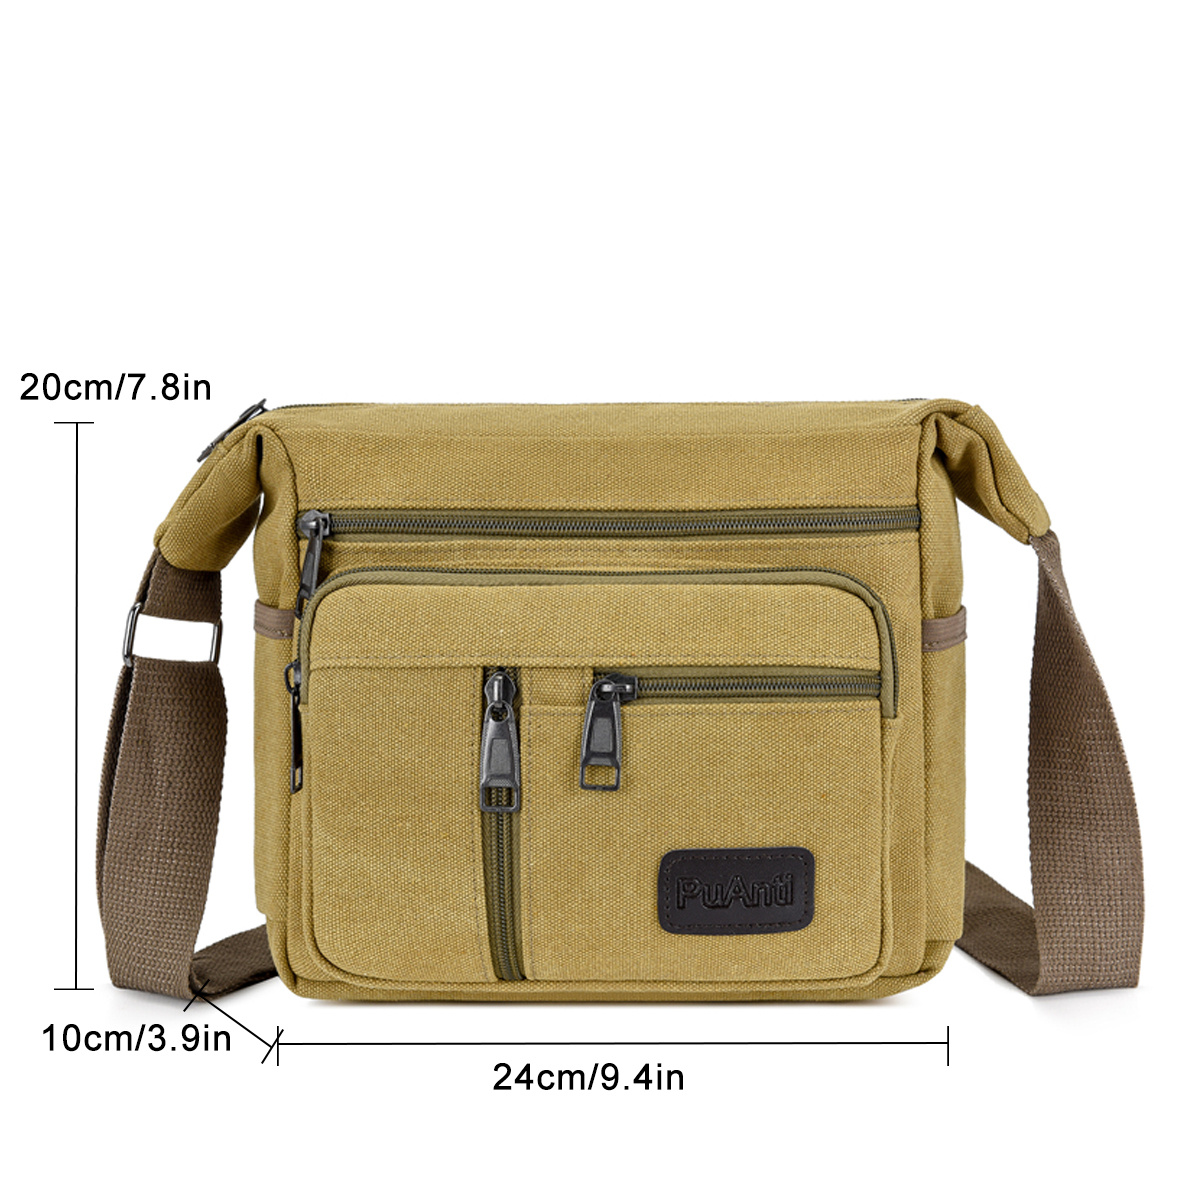 Men's Canvas Messenger Bag With Multiple Pockets, Large Capacity Portable  Tool Kit，Men's Casual Travel Hiking Crossbody Bag, Outdoor Shoulder Bags